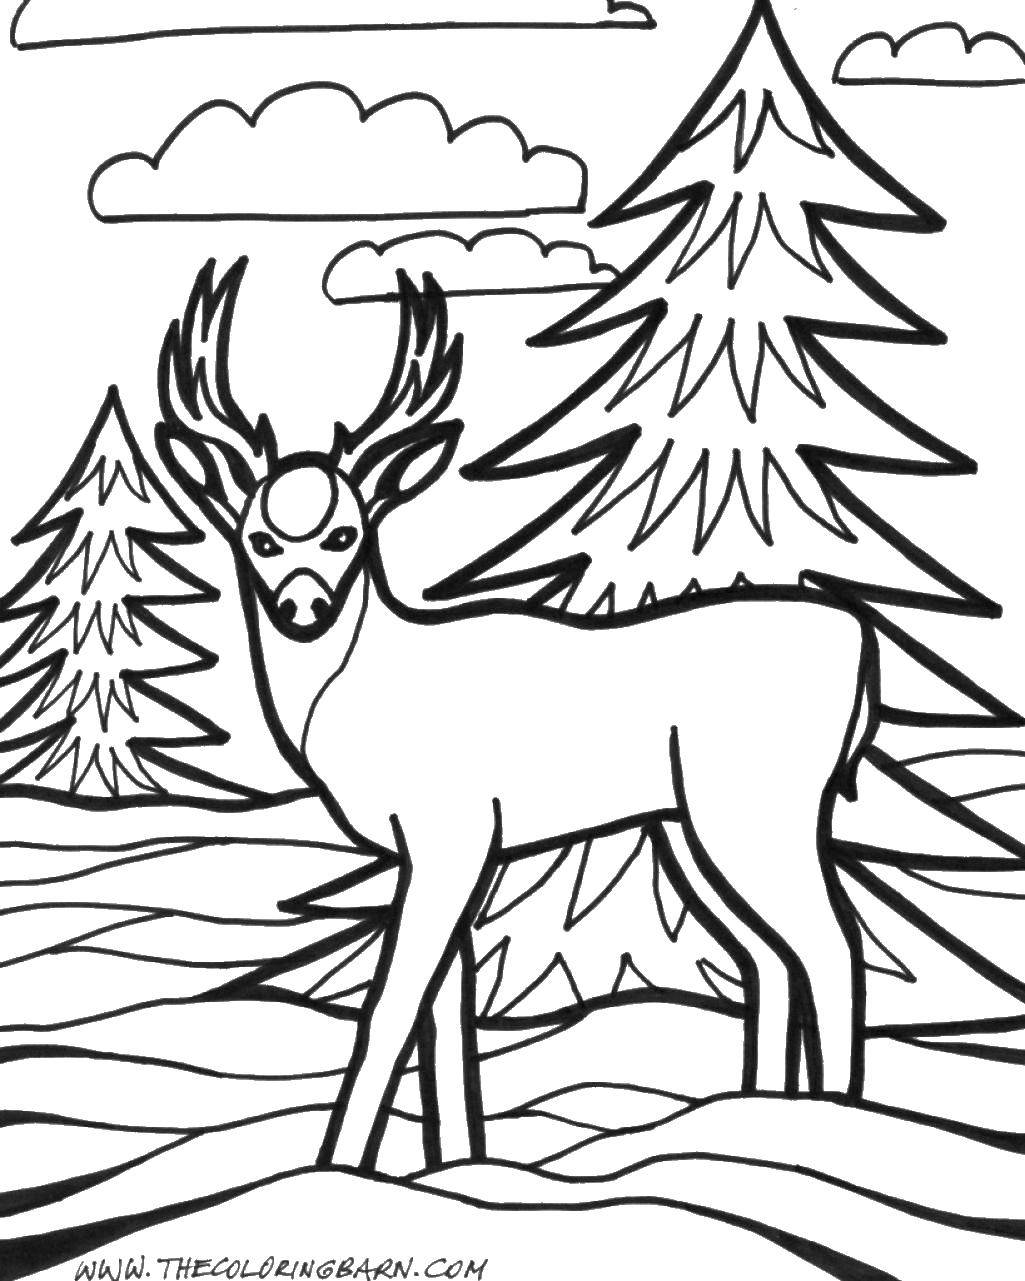 Coloring Deer in the forest. Category Animals. Tags:  Animals, deer.